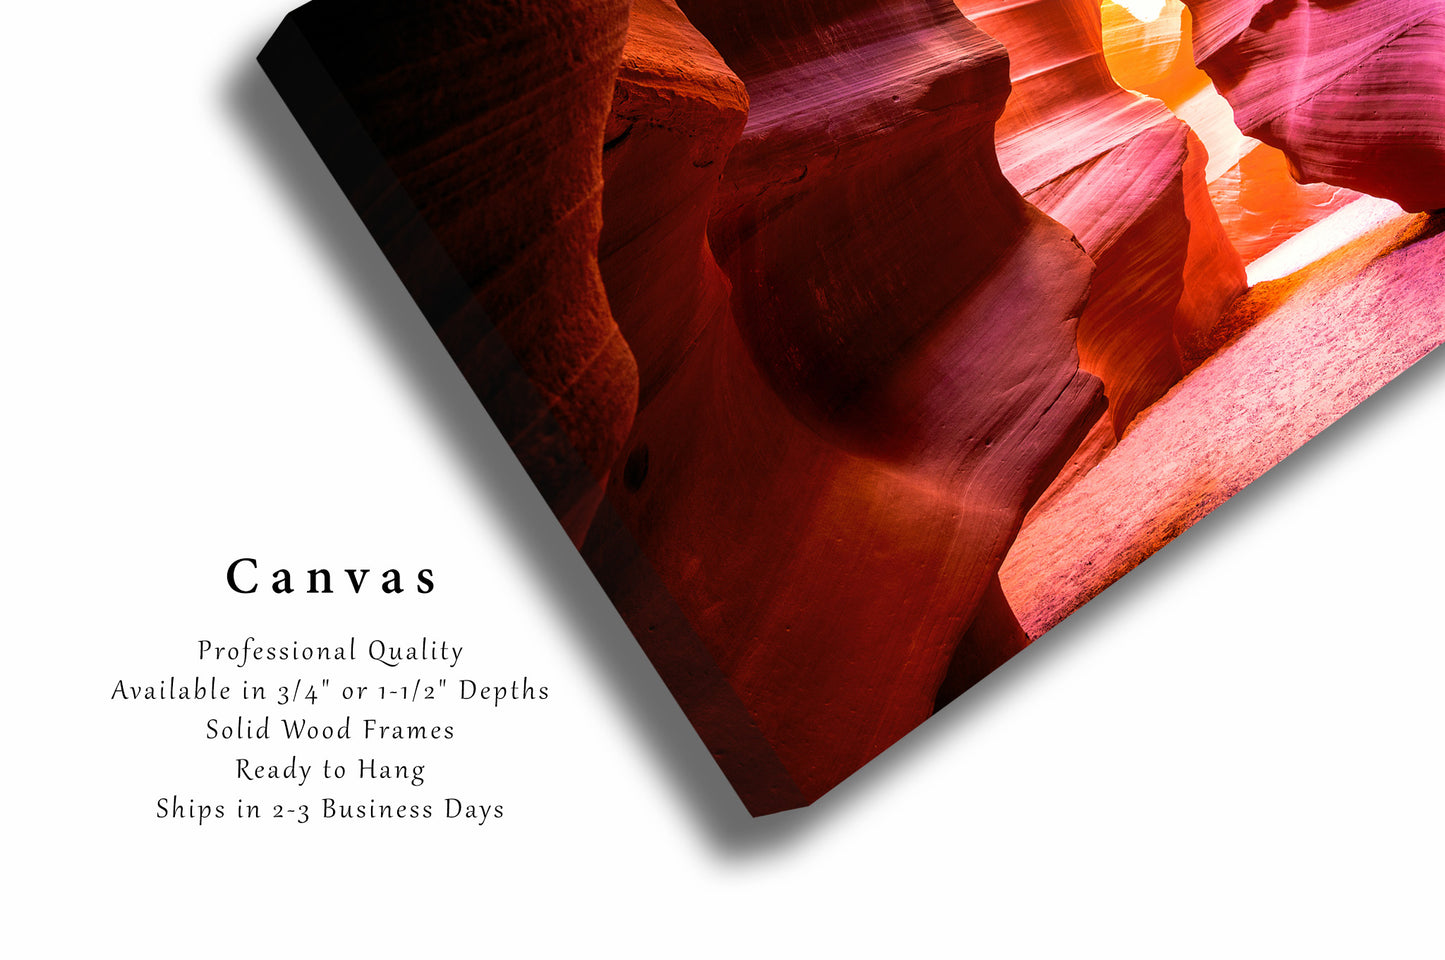 Antelope Canyon Canvas Wall Art (Ready to Hang) Gallery Wrap of Slot Canyon Walls Shaped as Hourglass in Arizona Desert Photography Southwestern Decor